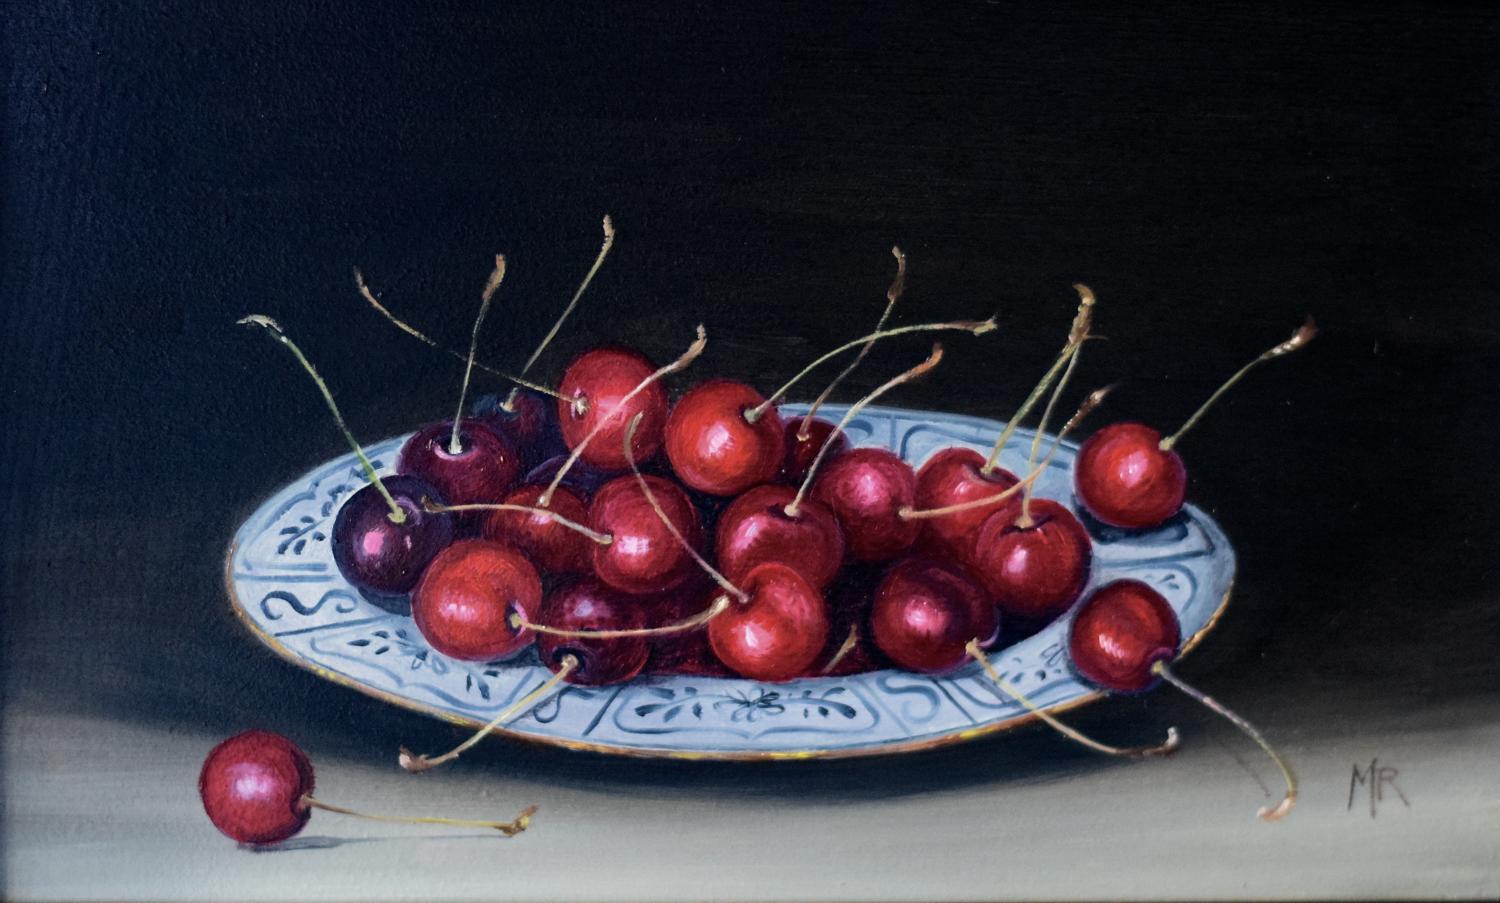 Cherries on a plate